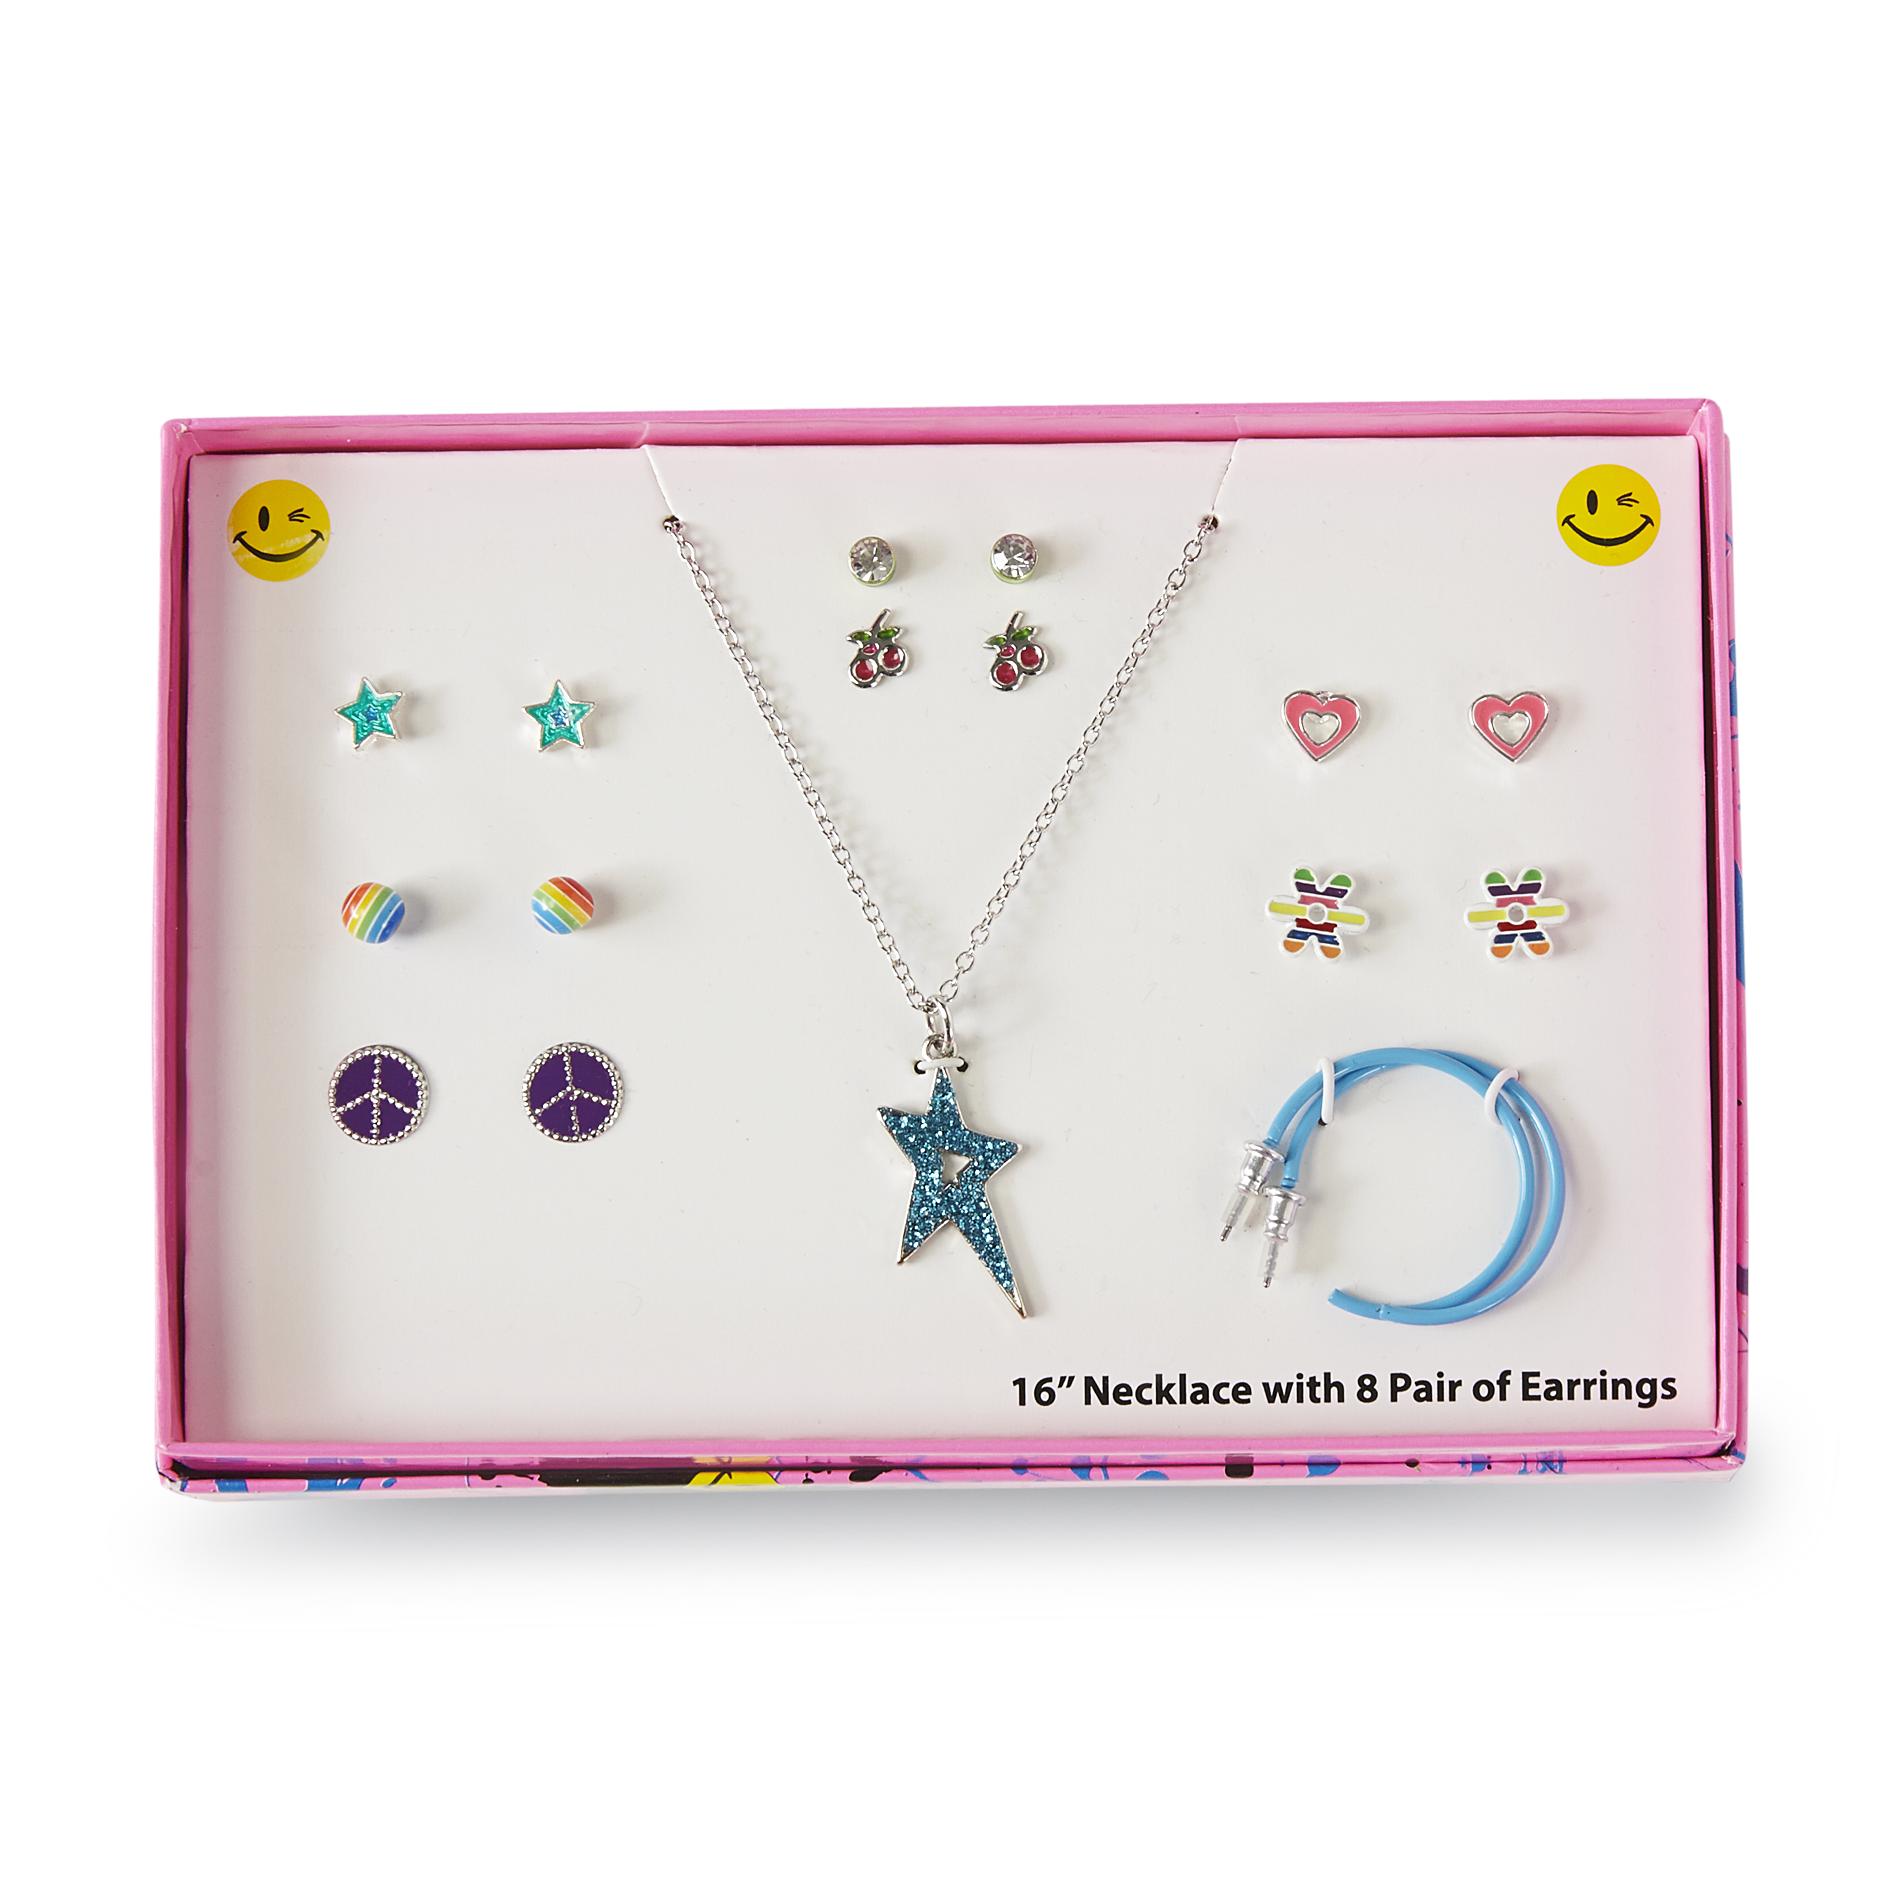 Joe Boxer Girl's Charm Necklace & 8-Pairs Earrings - Star